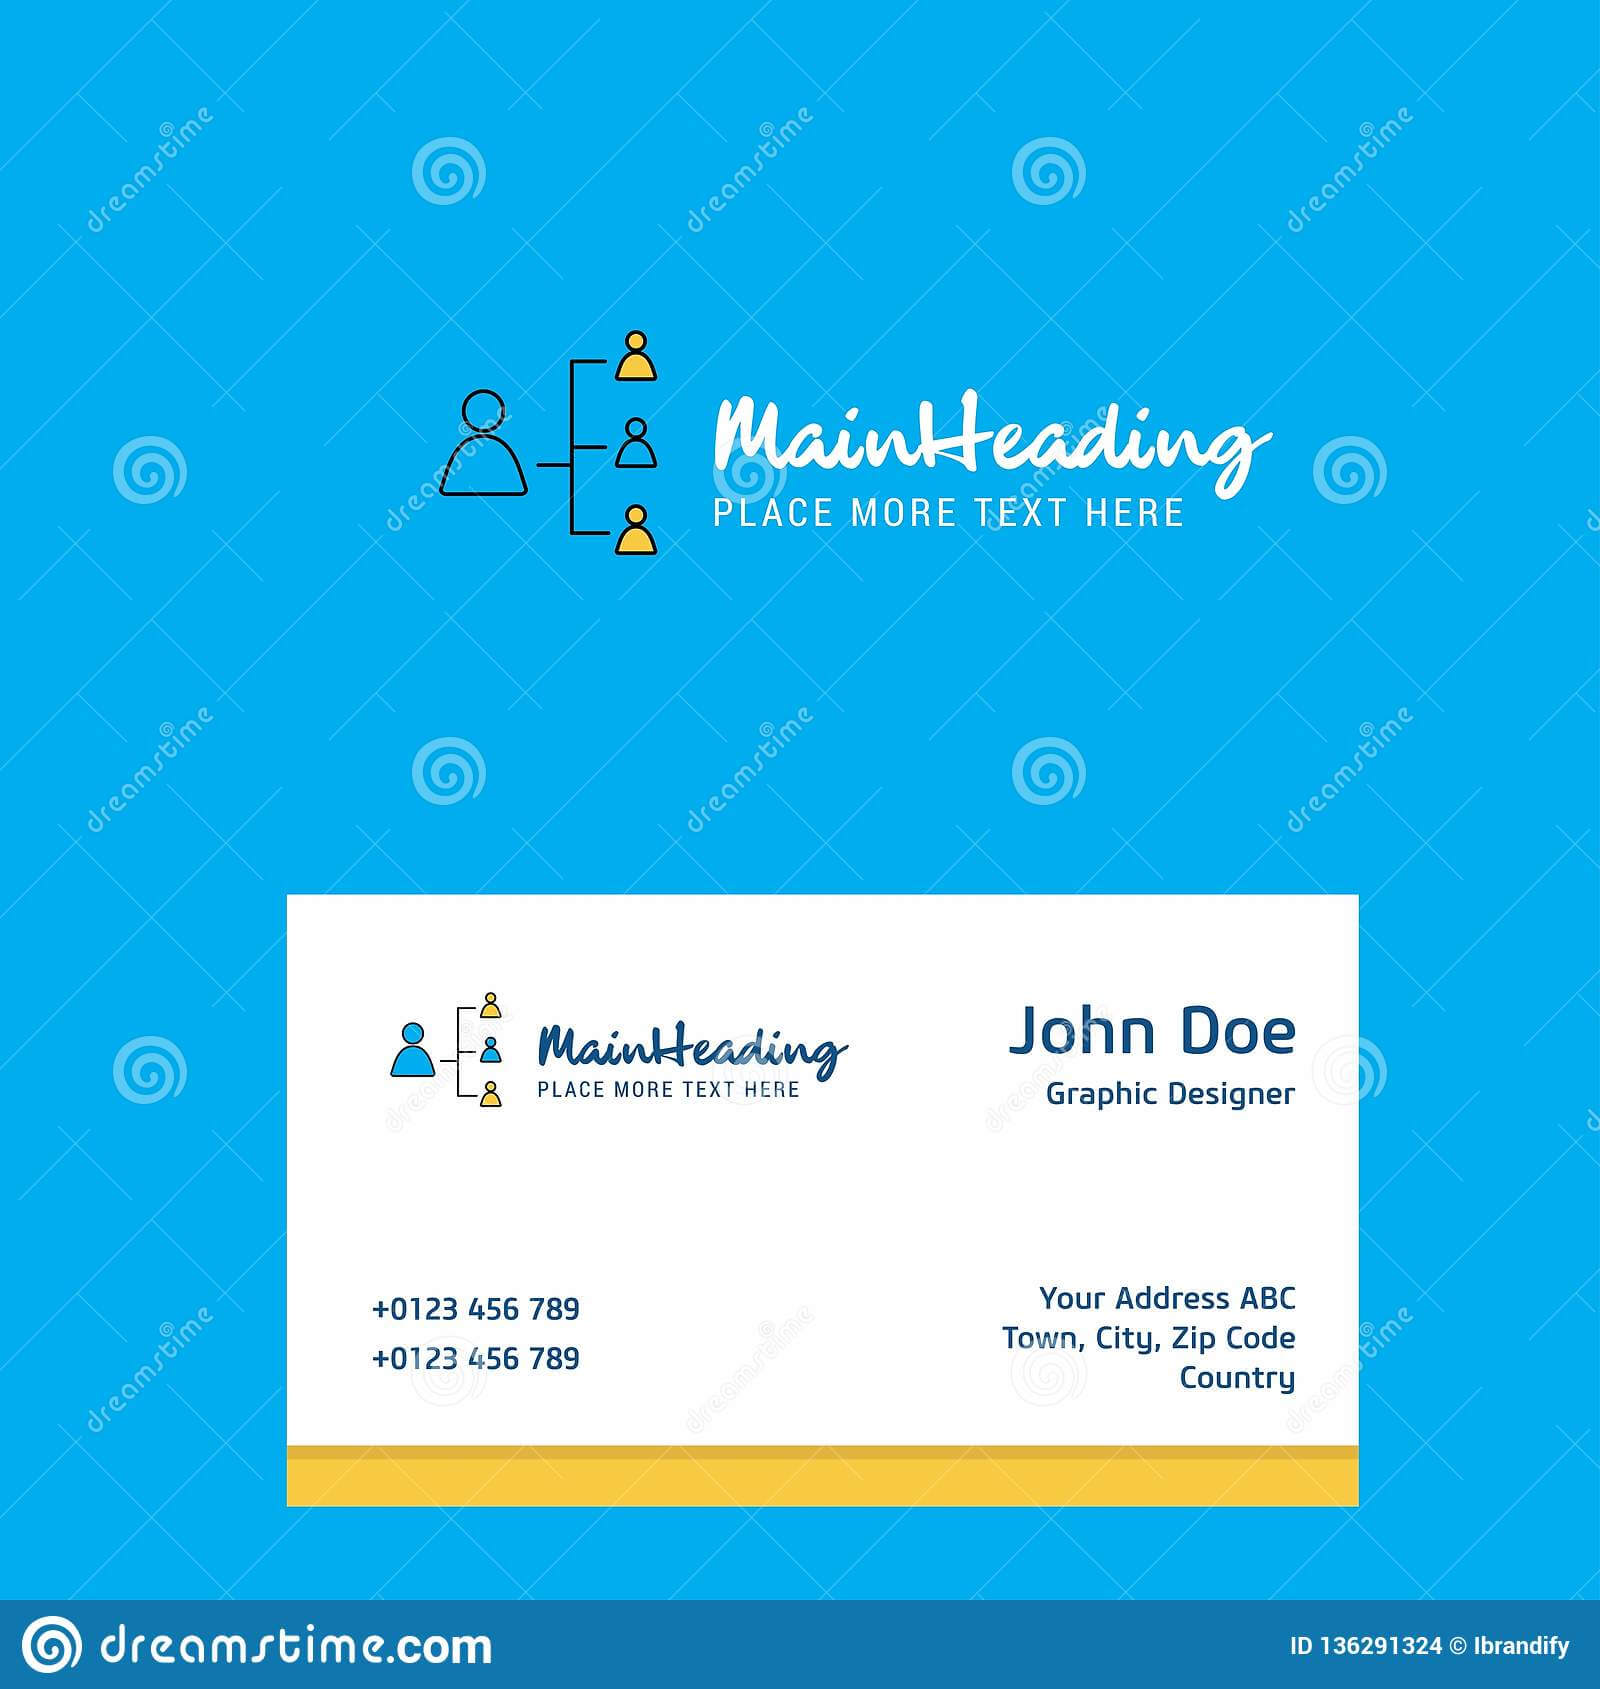 Networking Logo Design With Business Card Template. Elegant Intended For Networking Card Template